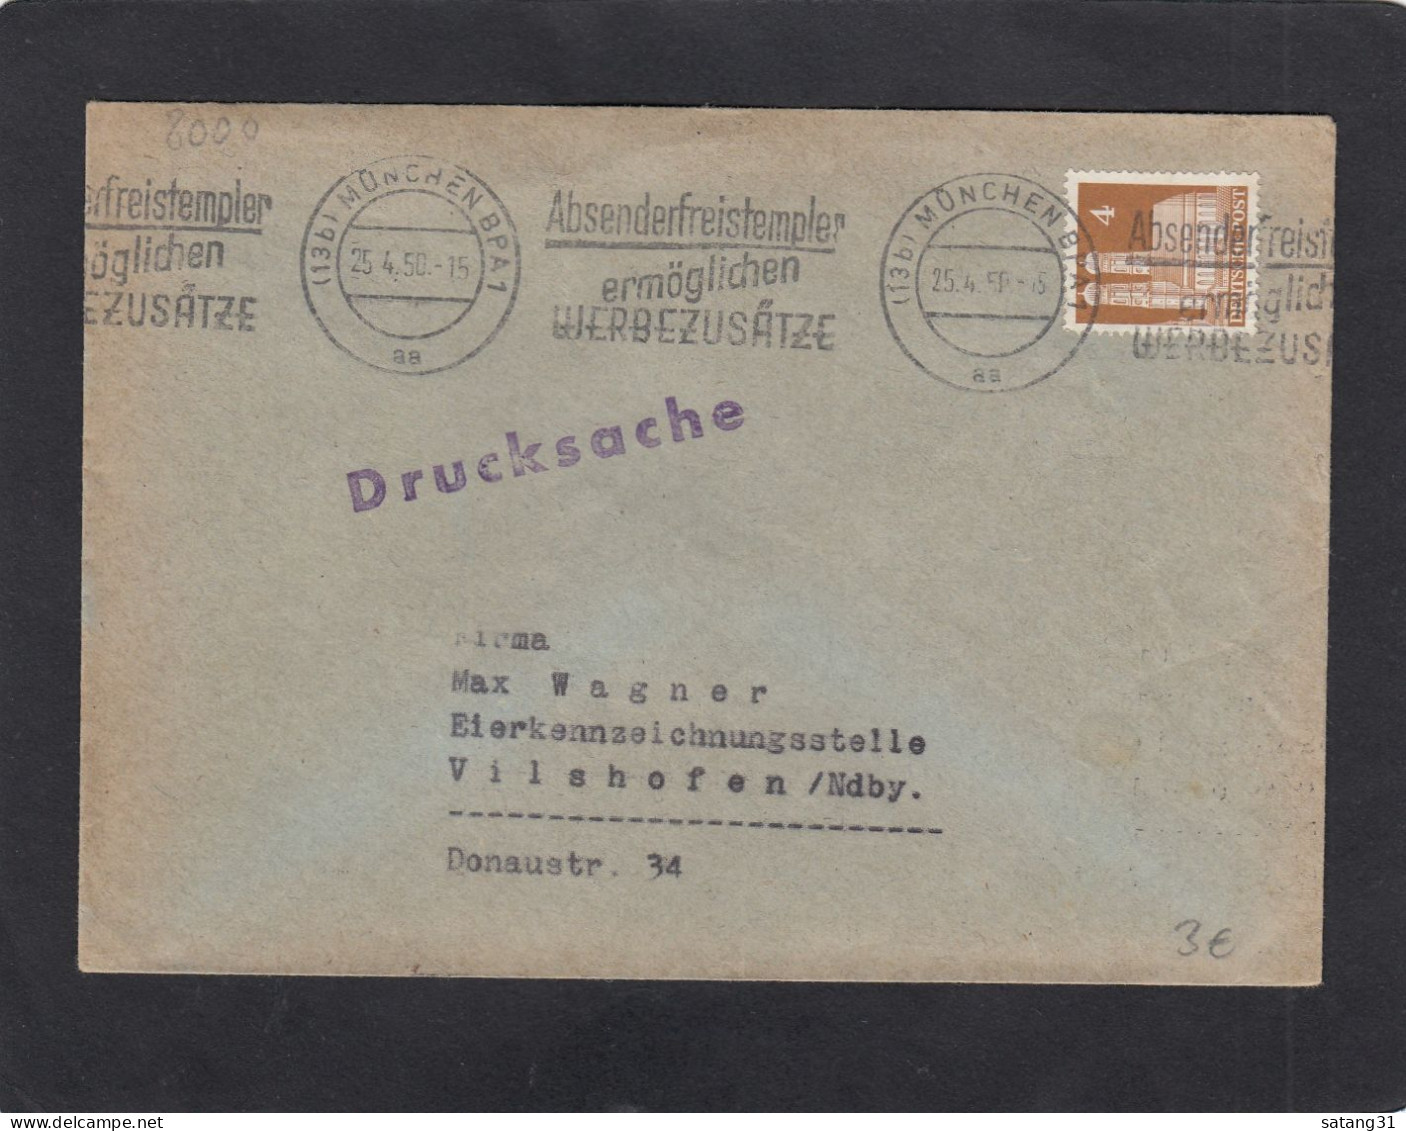 3 BRIEFE MIT STEMPEL ZUM THEMA "POST". - Covers & Documents